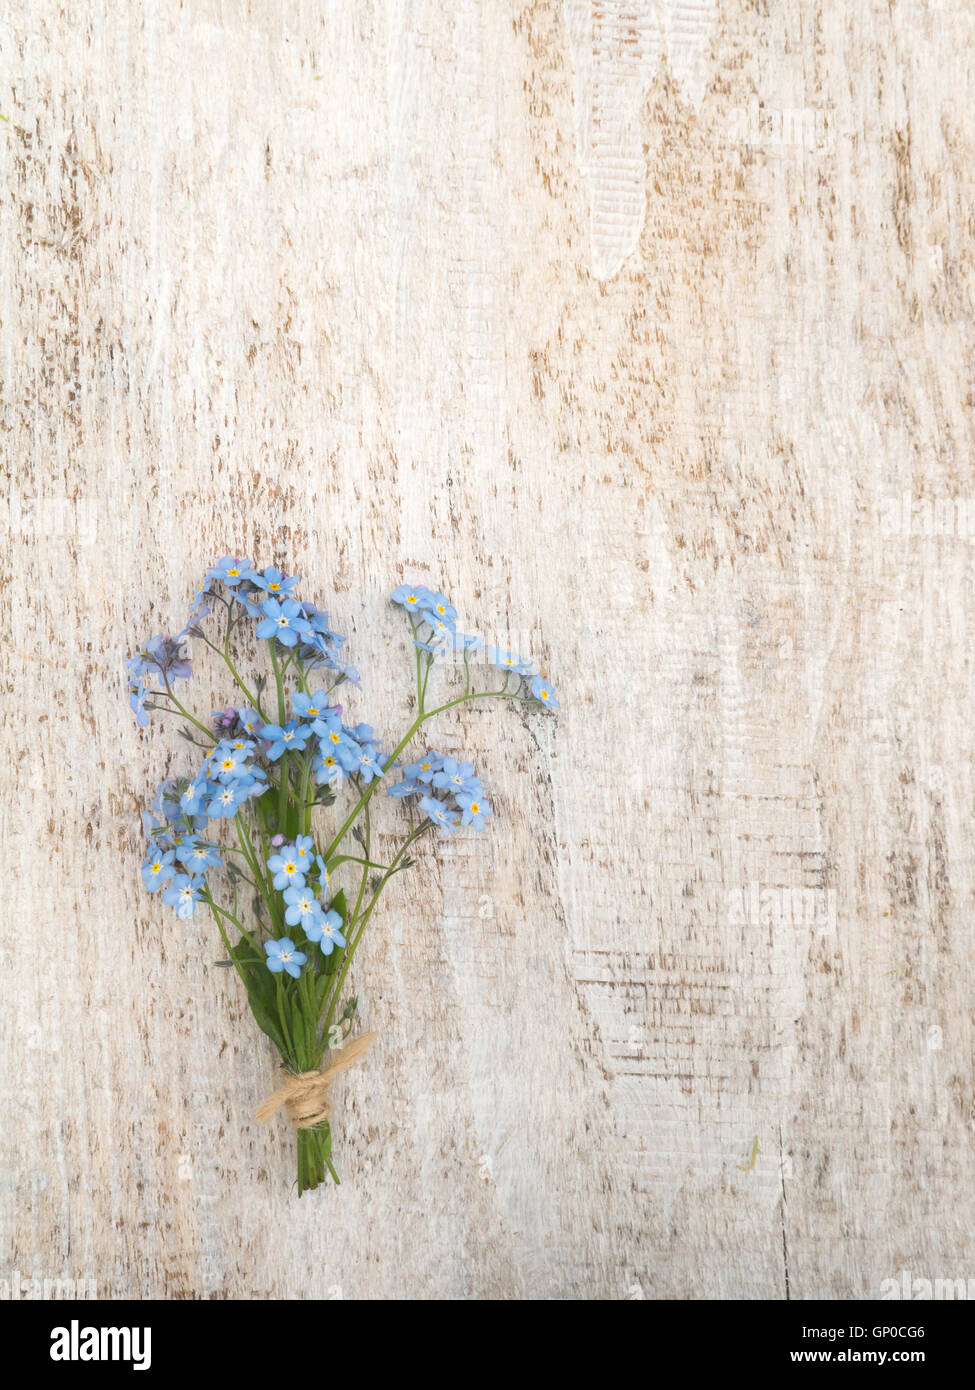 Blue forget-me-not flowers bunch tied with jute rope on the rustic white textured wooden background Stock Photo